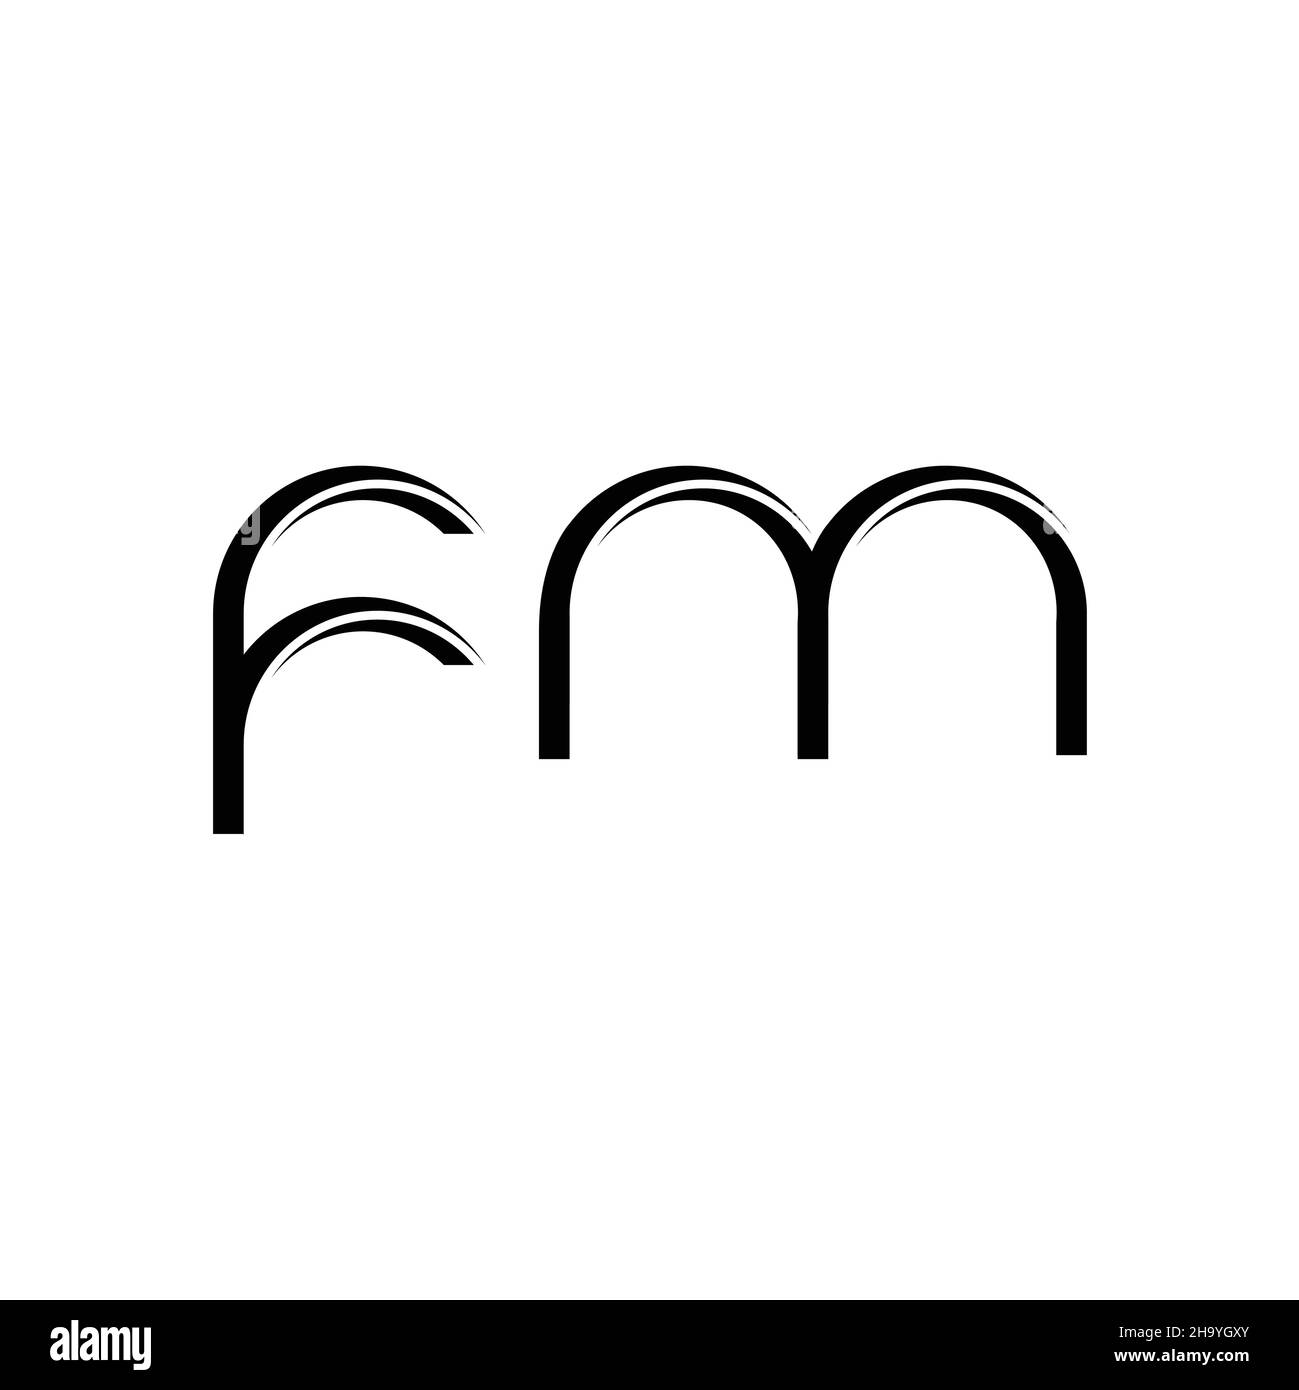 FM Logo monogram with slice rounded modern design template isolated on white background Stock Vector